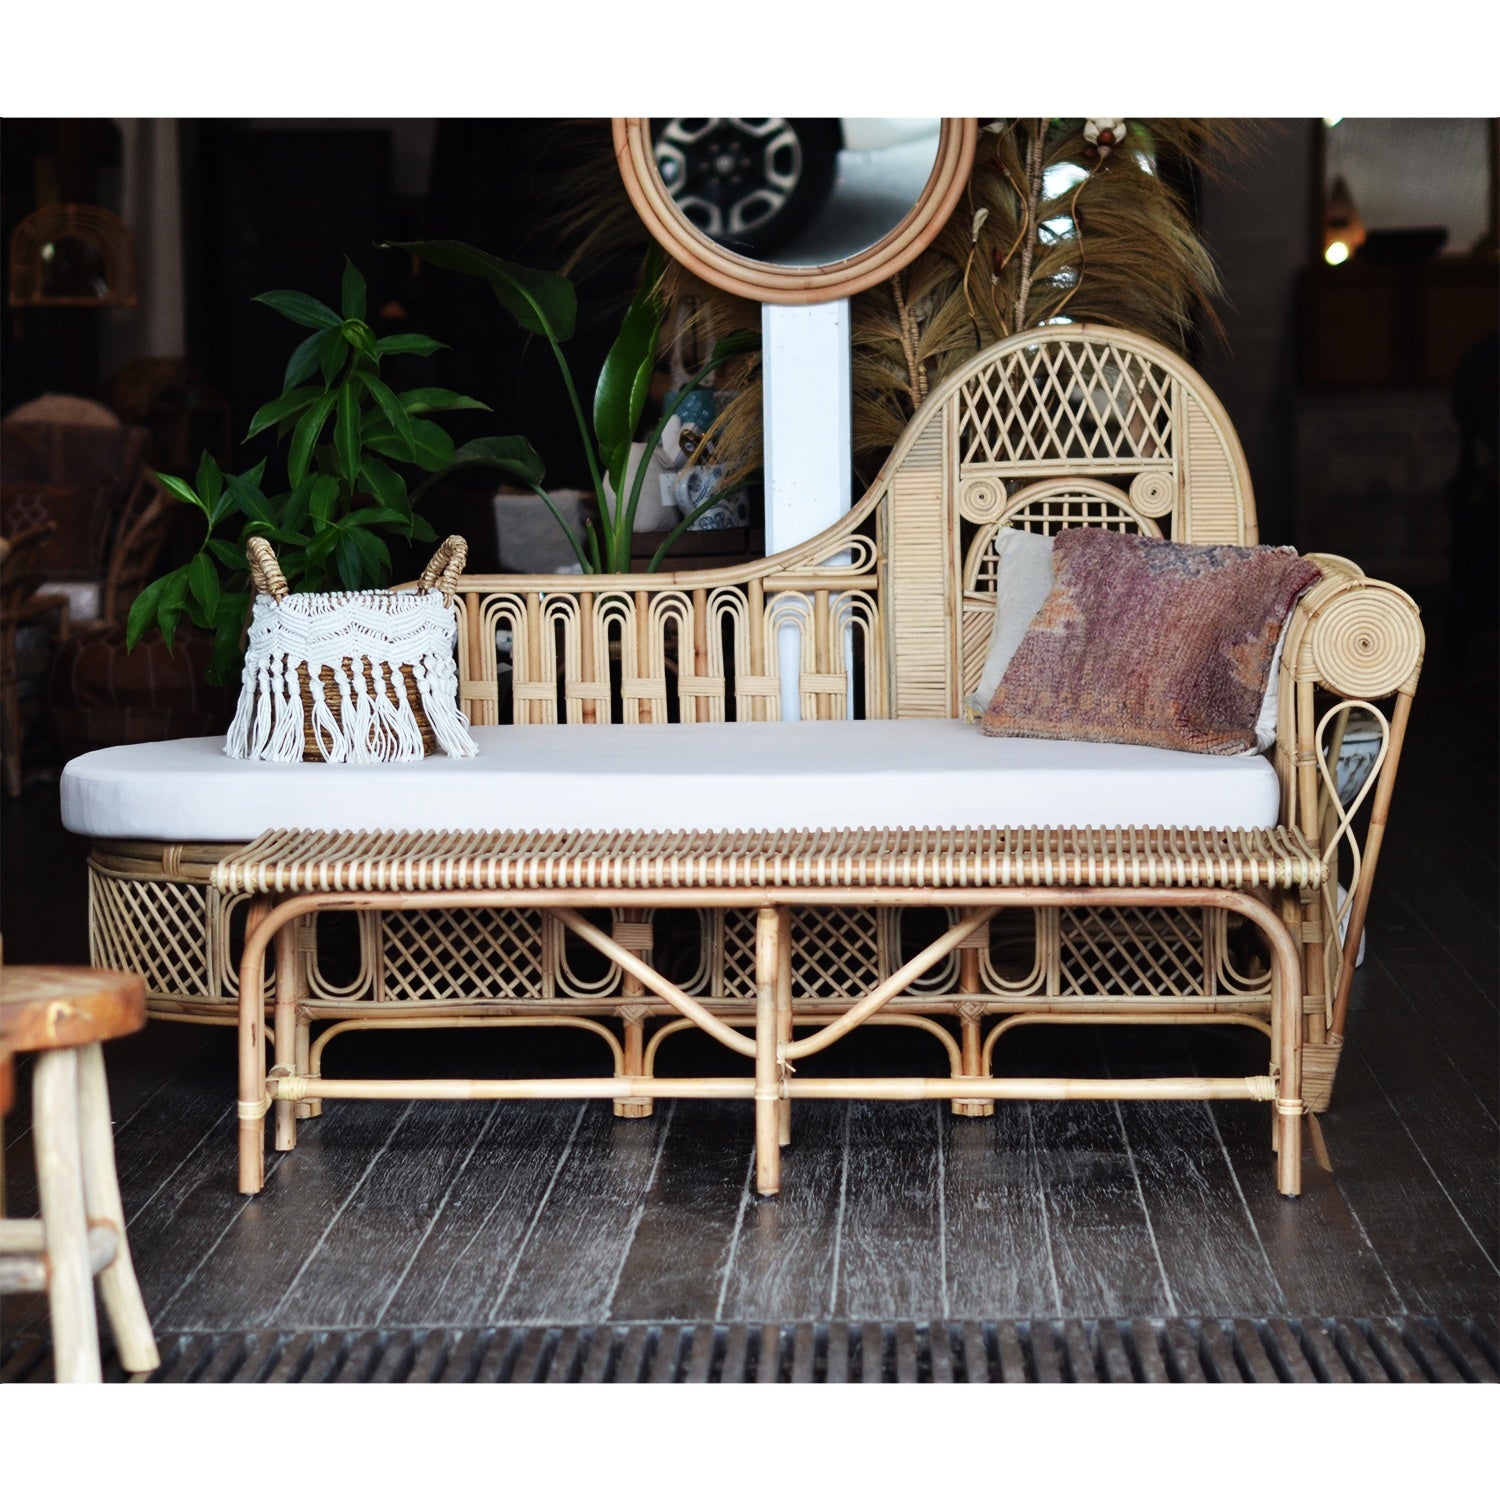 The King Natural Rattan Daybed - Natural | Pre Order